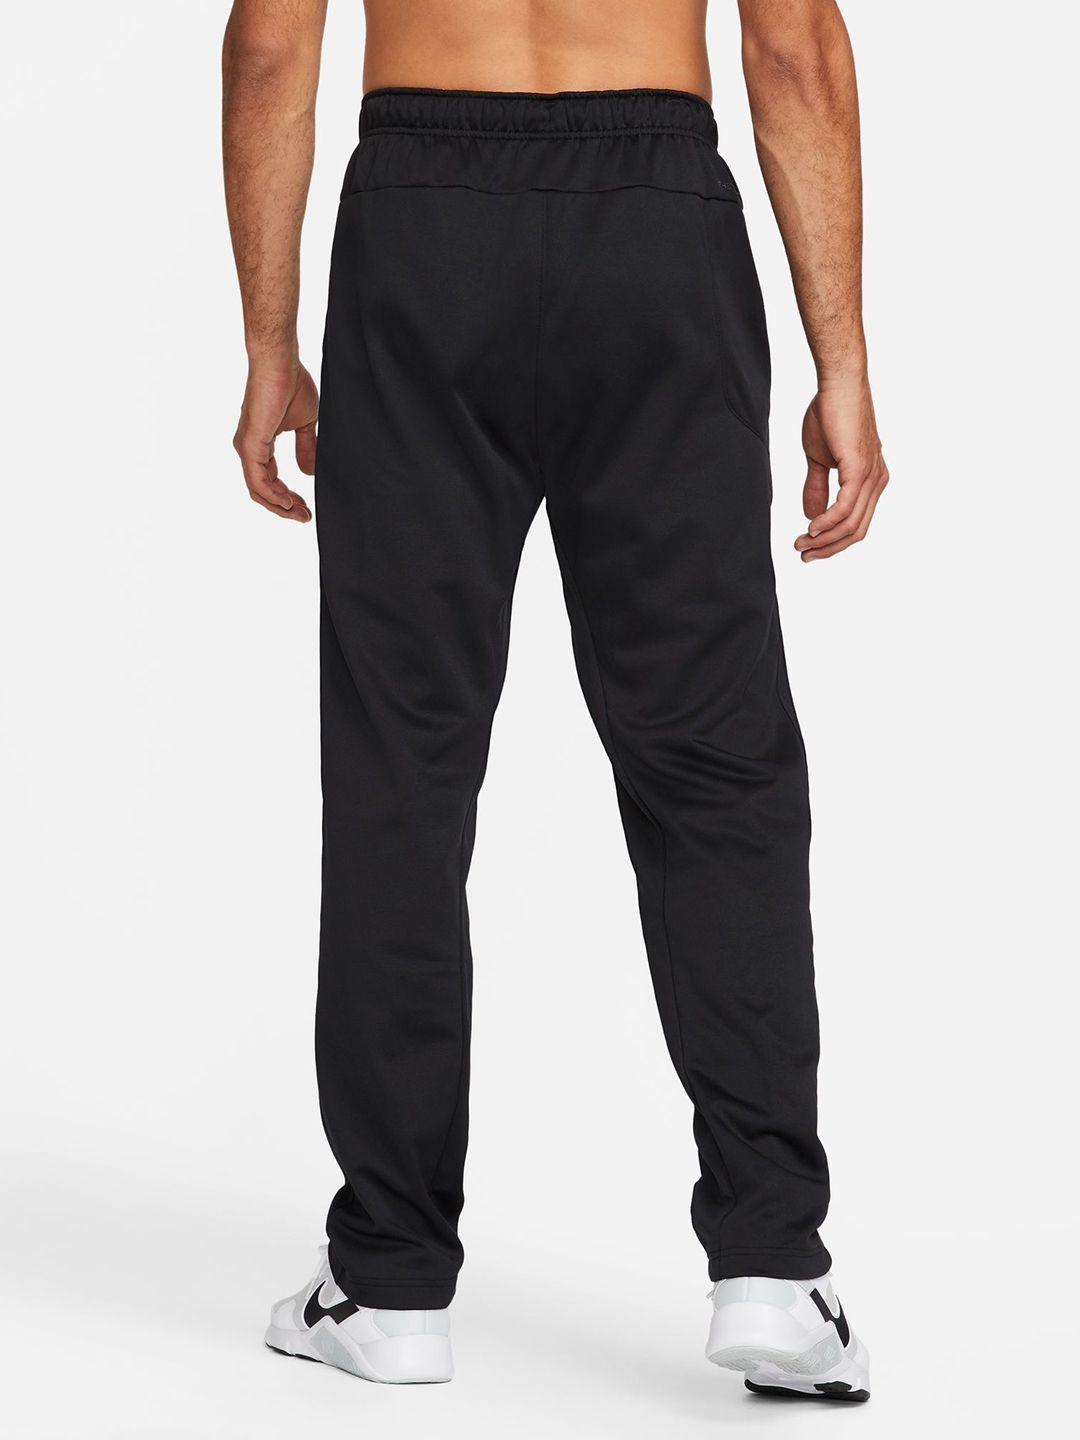 nike-men-solid-therma-fit-training-track-pants